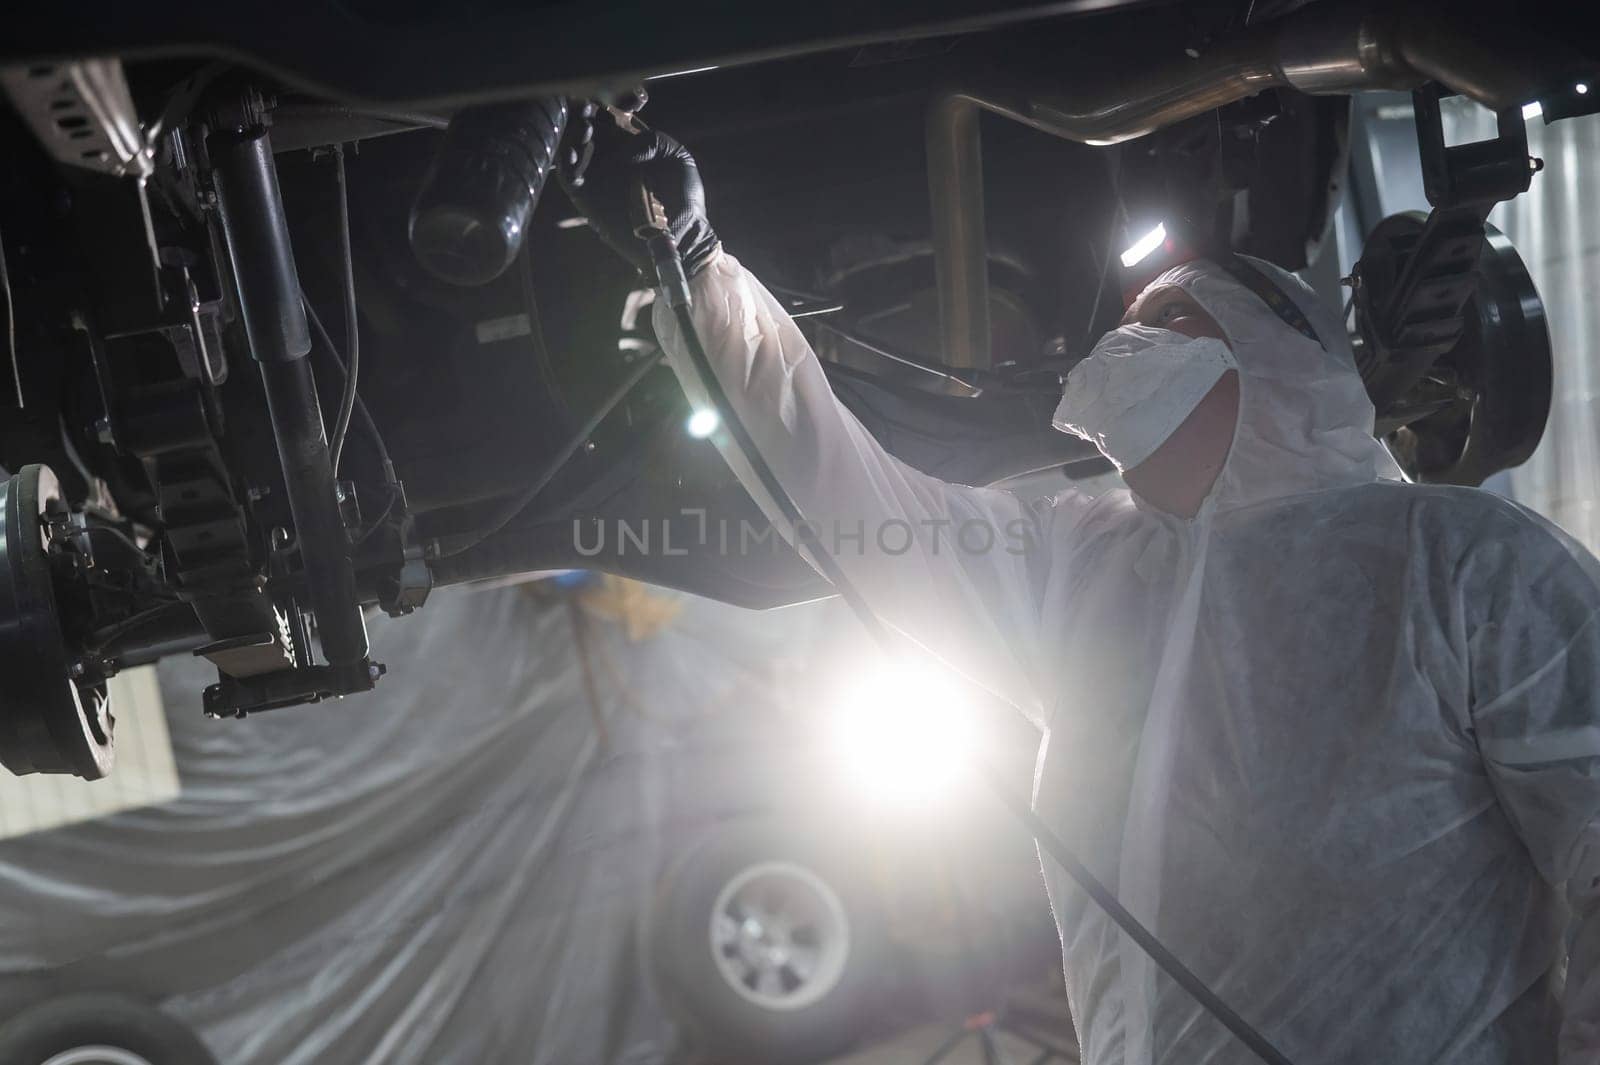 The master sprays an anti-corrosion compound on the bottom of the car